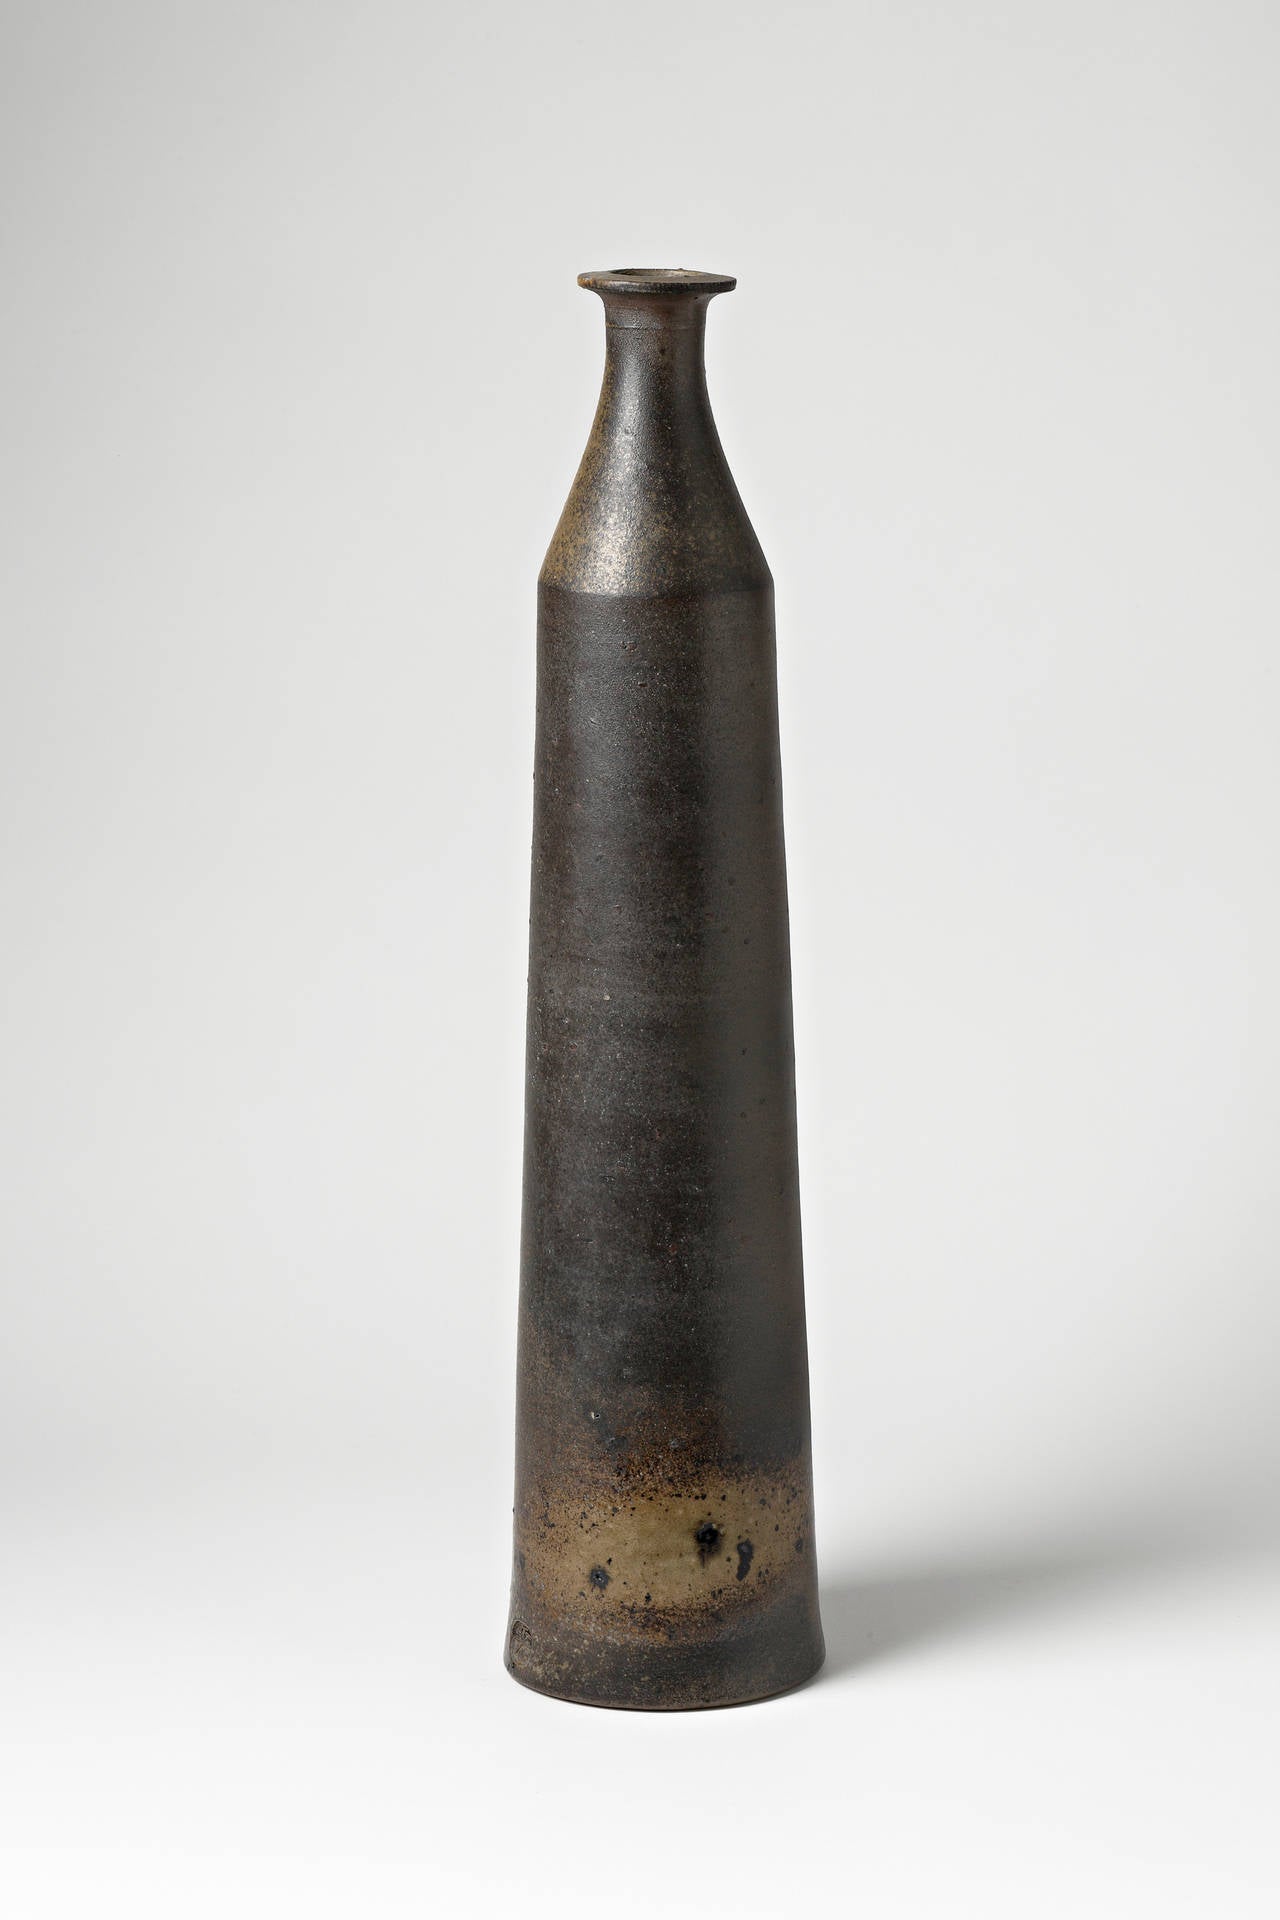 A spectacular stoneware bottle by Robert Deblander.
Artist' signature at the base,
circa 1970-1975.